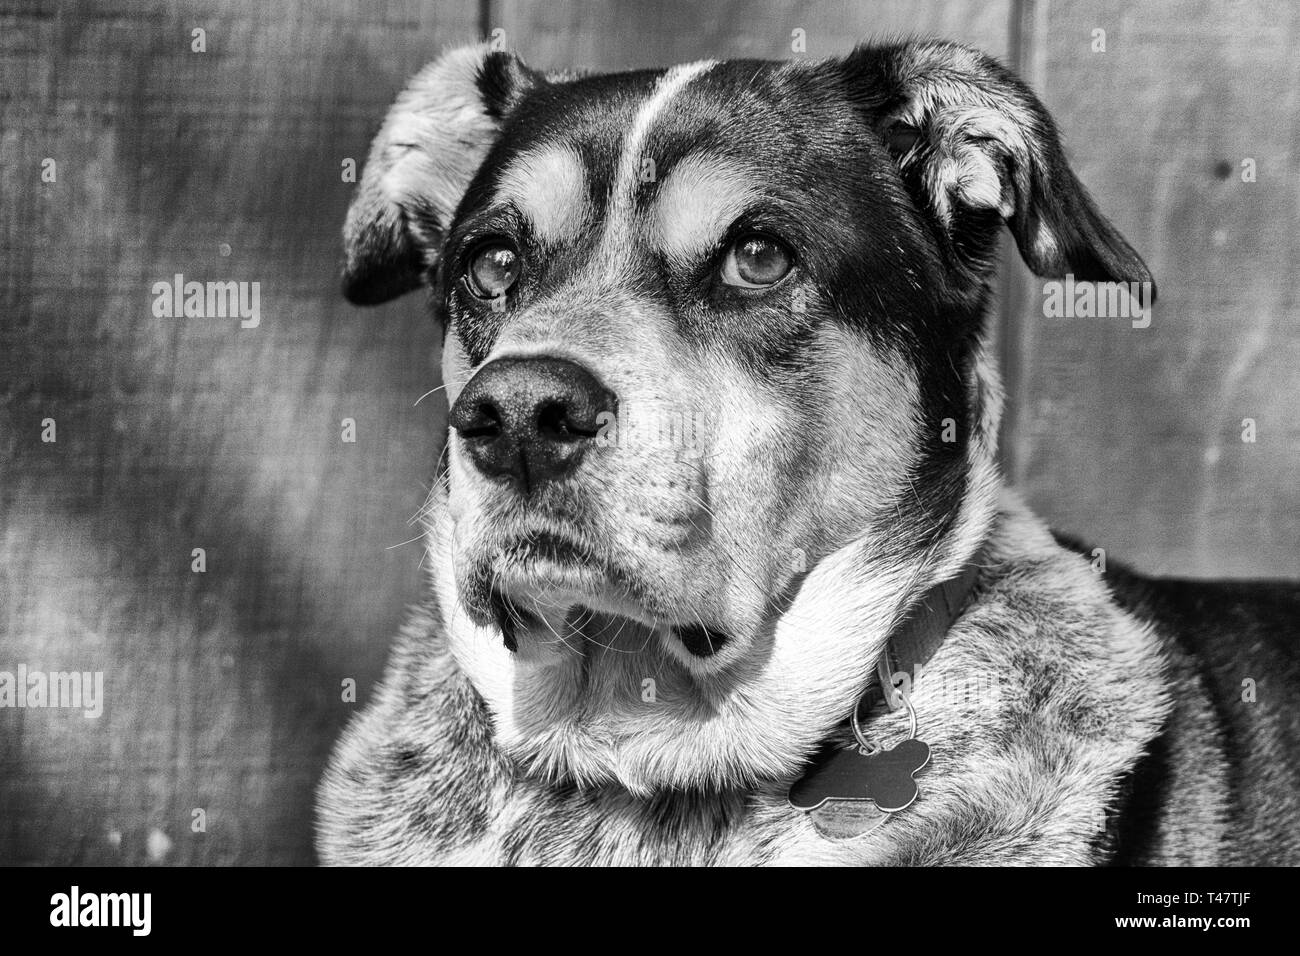 Black and white close up image of a mixed breed hound type dog Stock Photo